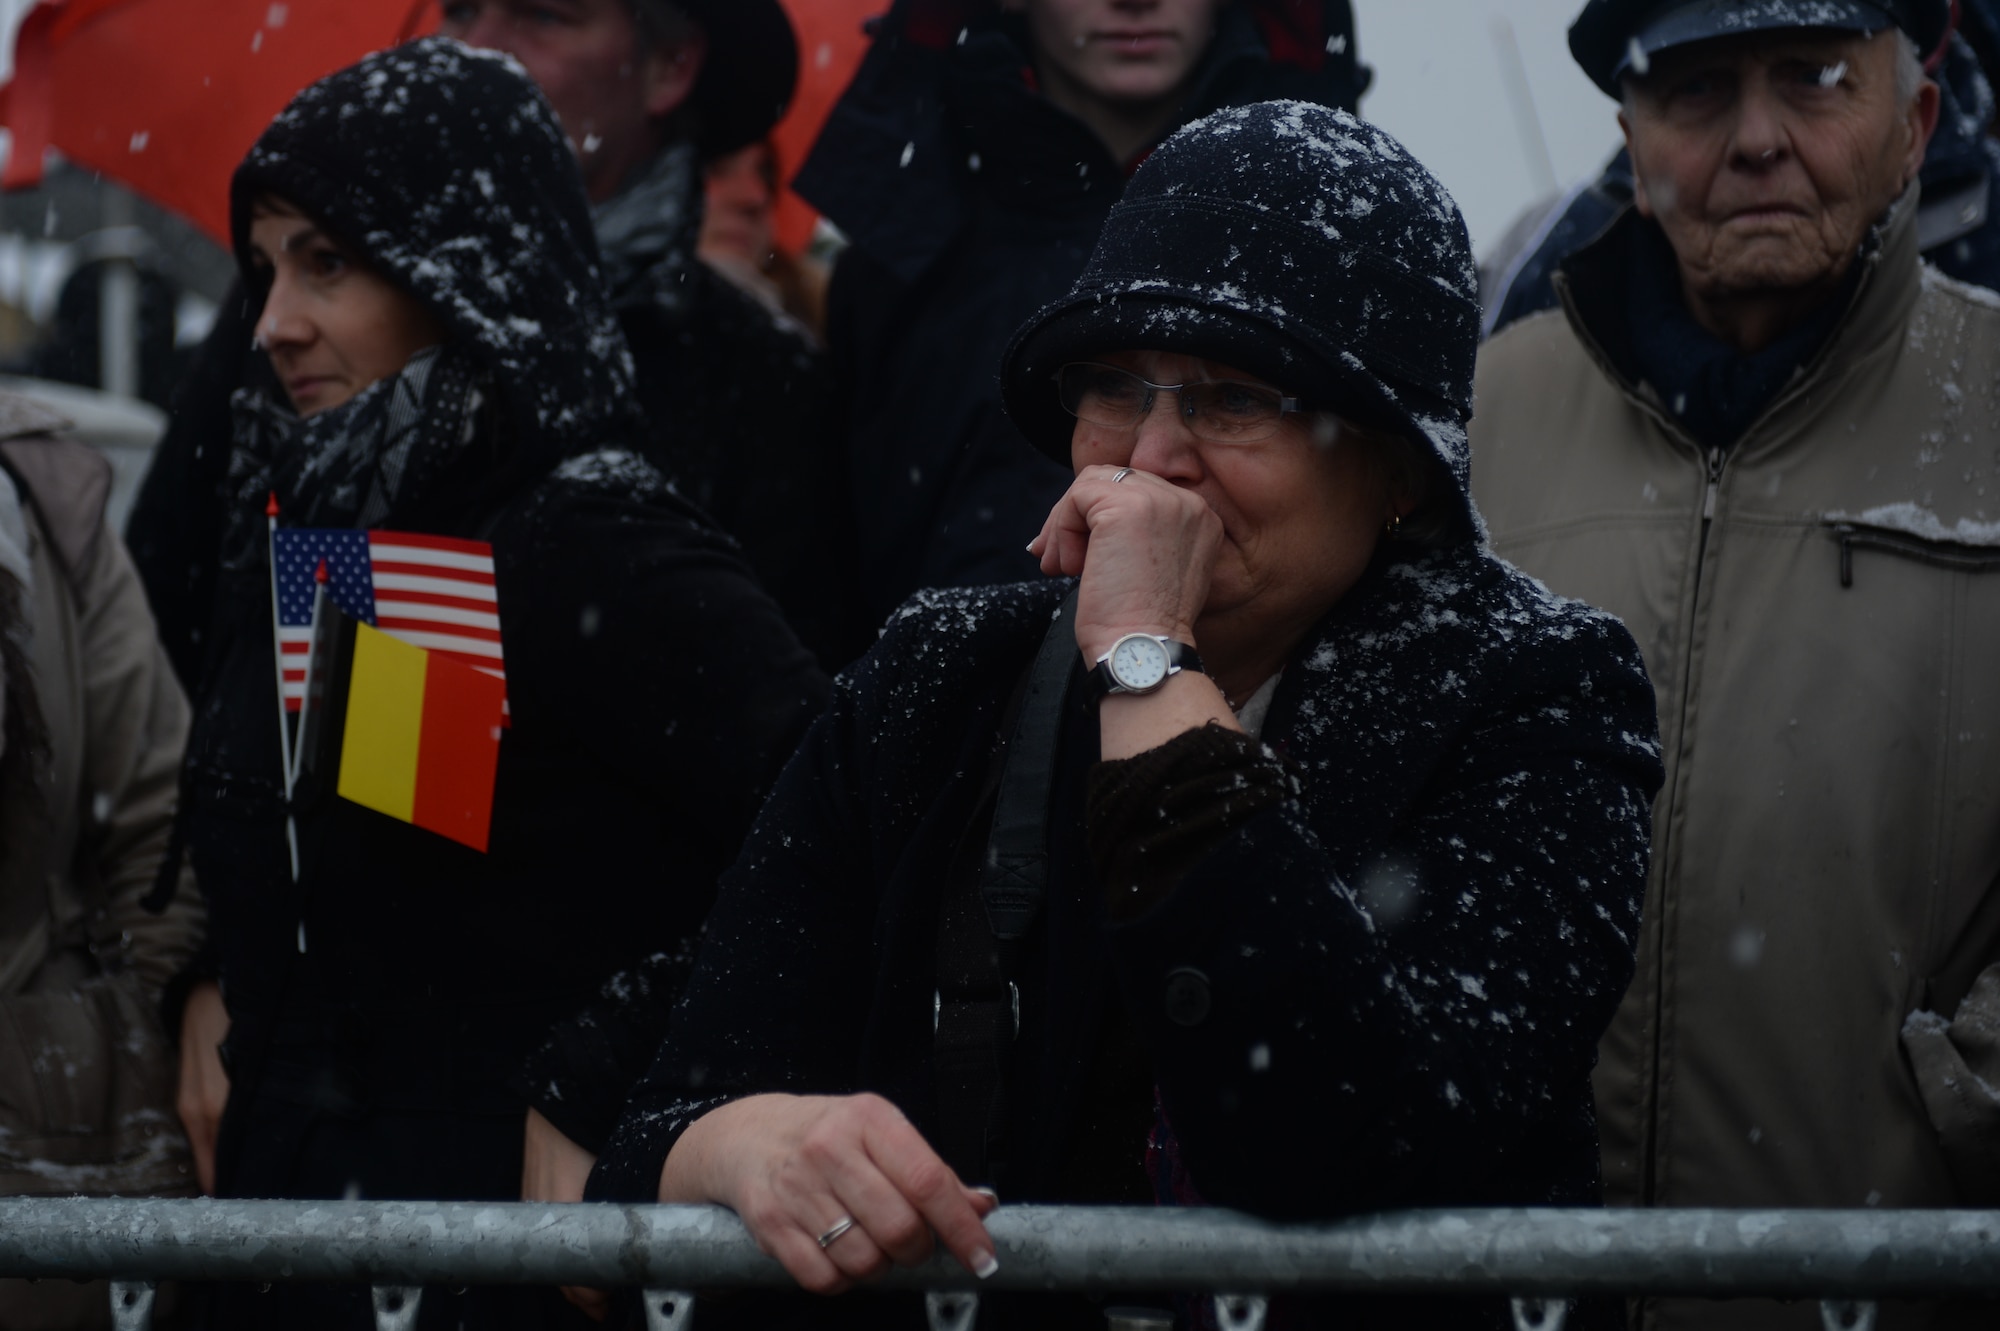 Jocelyne Gillis of Saint-Léger, Belgium, cries at the arrival of surviving World War II veterans before a ceremony in Bastogne, Belgium, Dec. 13, 2014. The veterans served during the Battle of the Bulge, a six-week campaign that liberated the city and signaled the coming surrender of Axis forces during the war. (U.S. Air Force photo by Staff Sgt. Joe W. McFadden/Released)